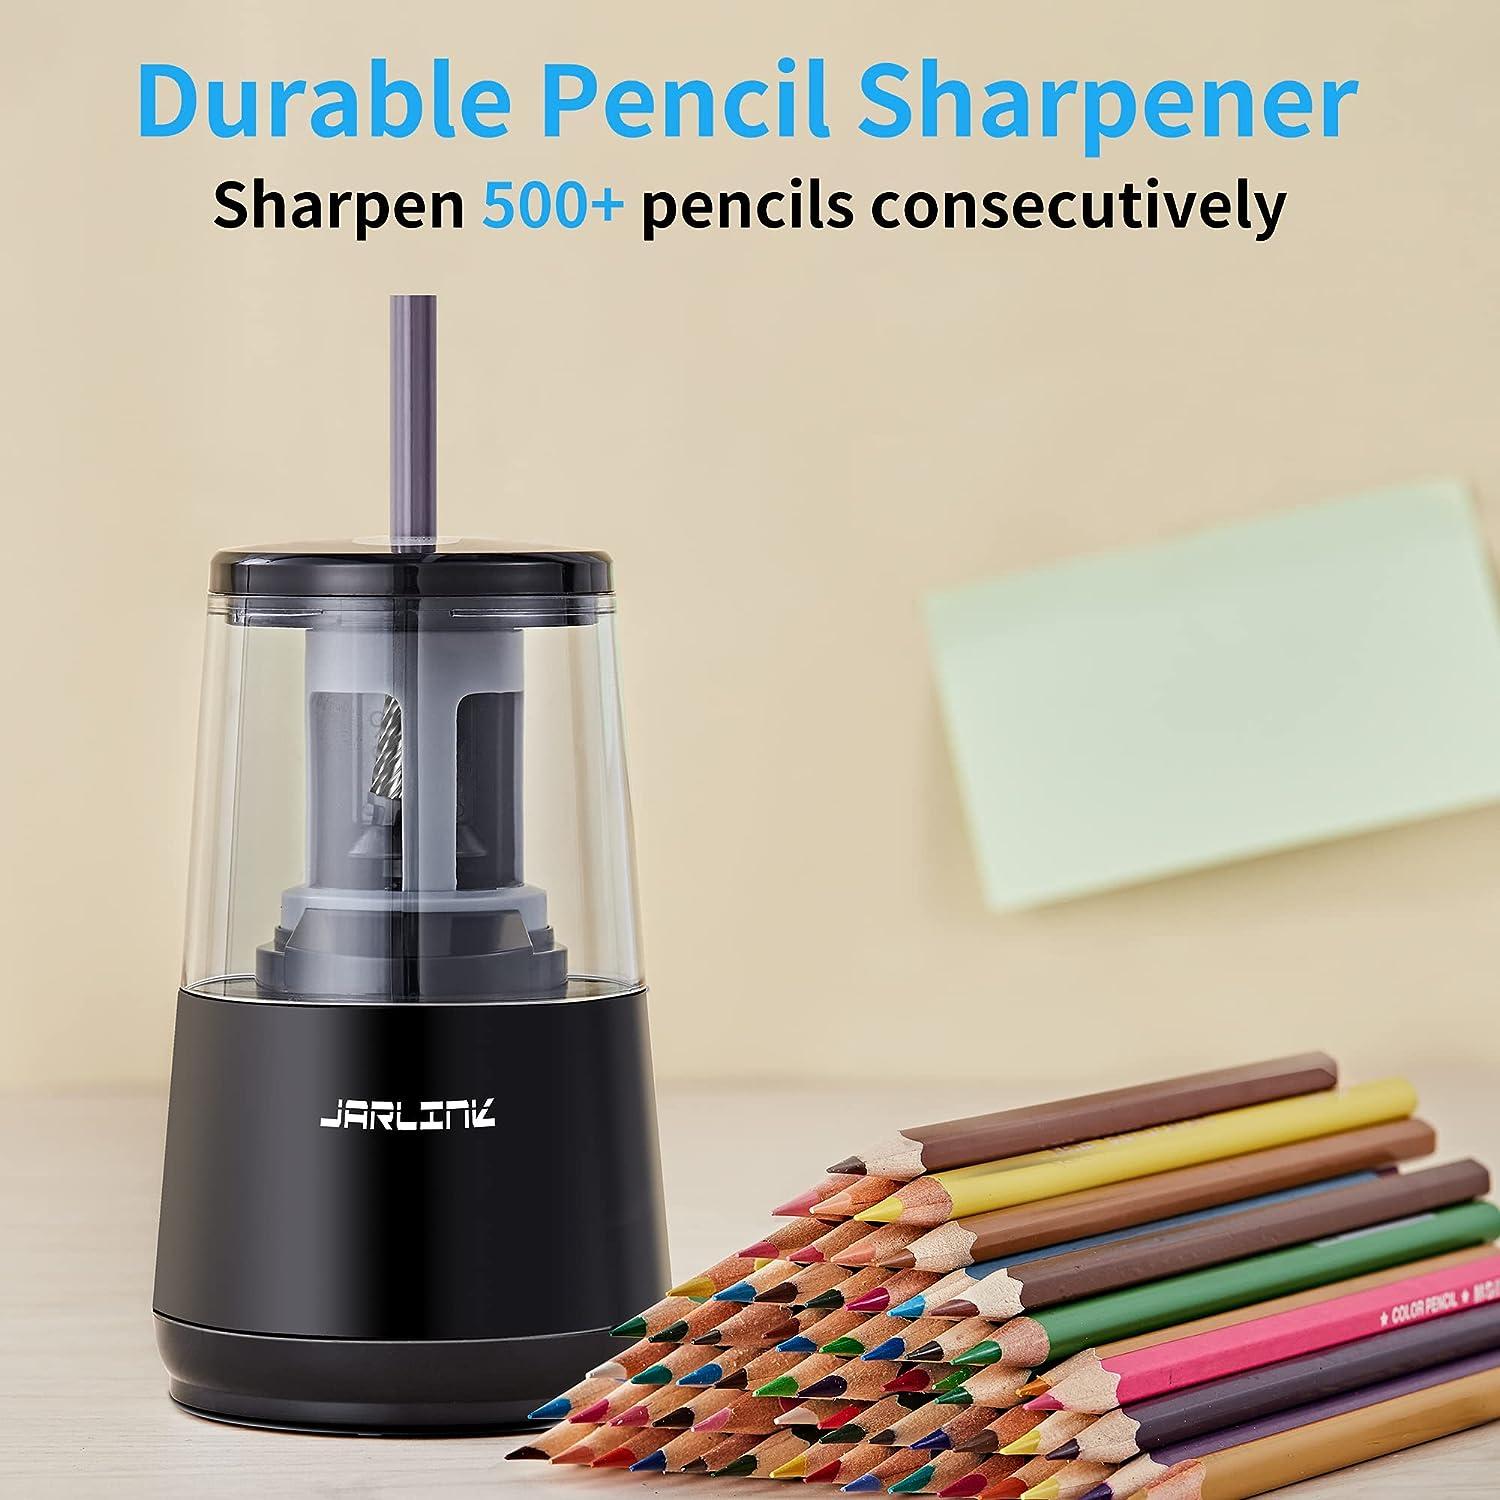 Pencil Sharpeners Battery Powered Automatic- Electric Pencil Sharpener  Handheld Heavy Duty for No.2/Colored Pencils(6-8mm), Pencil sharpeners  Manual